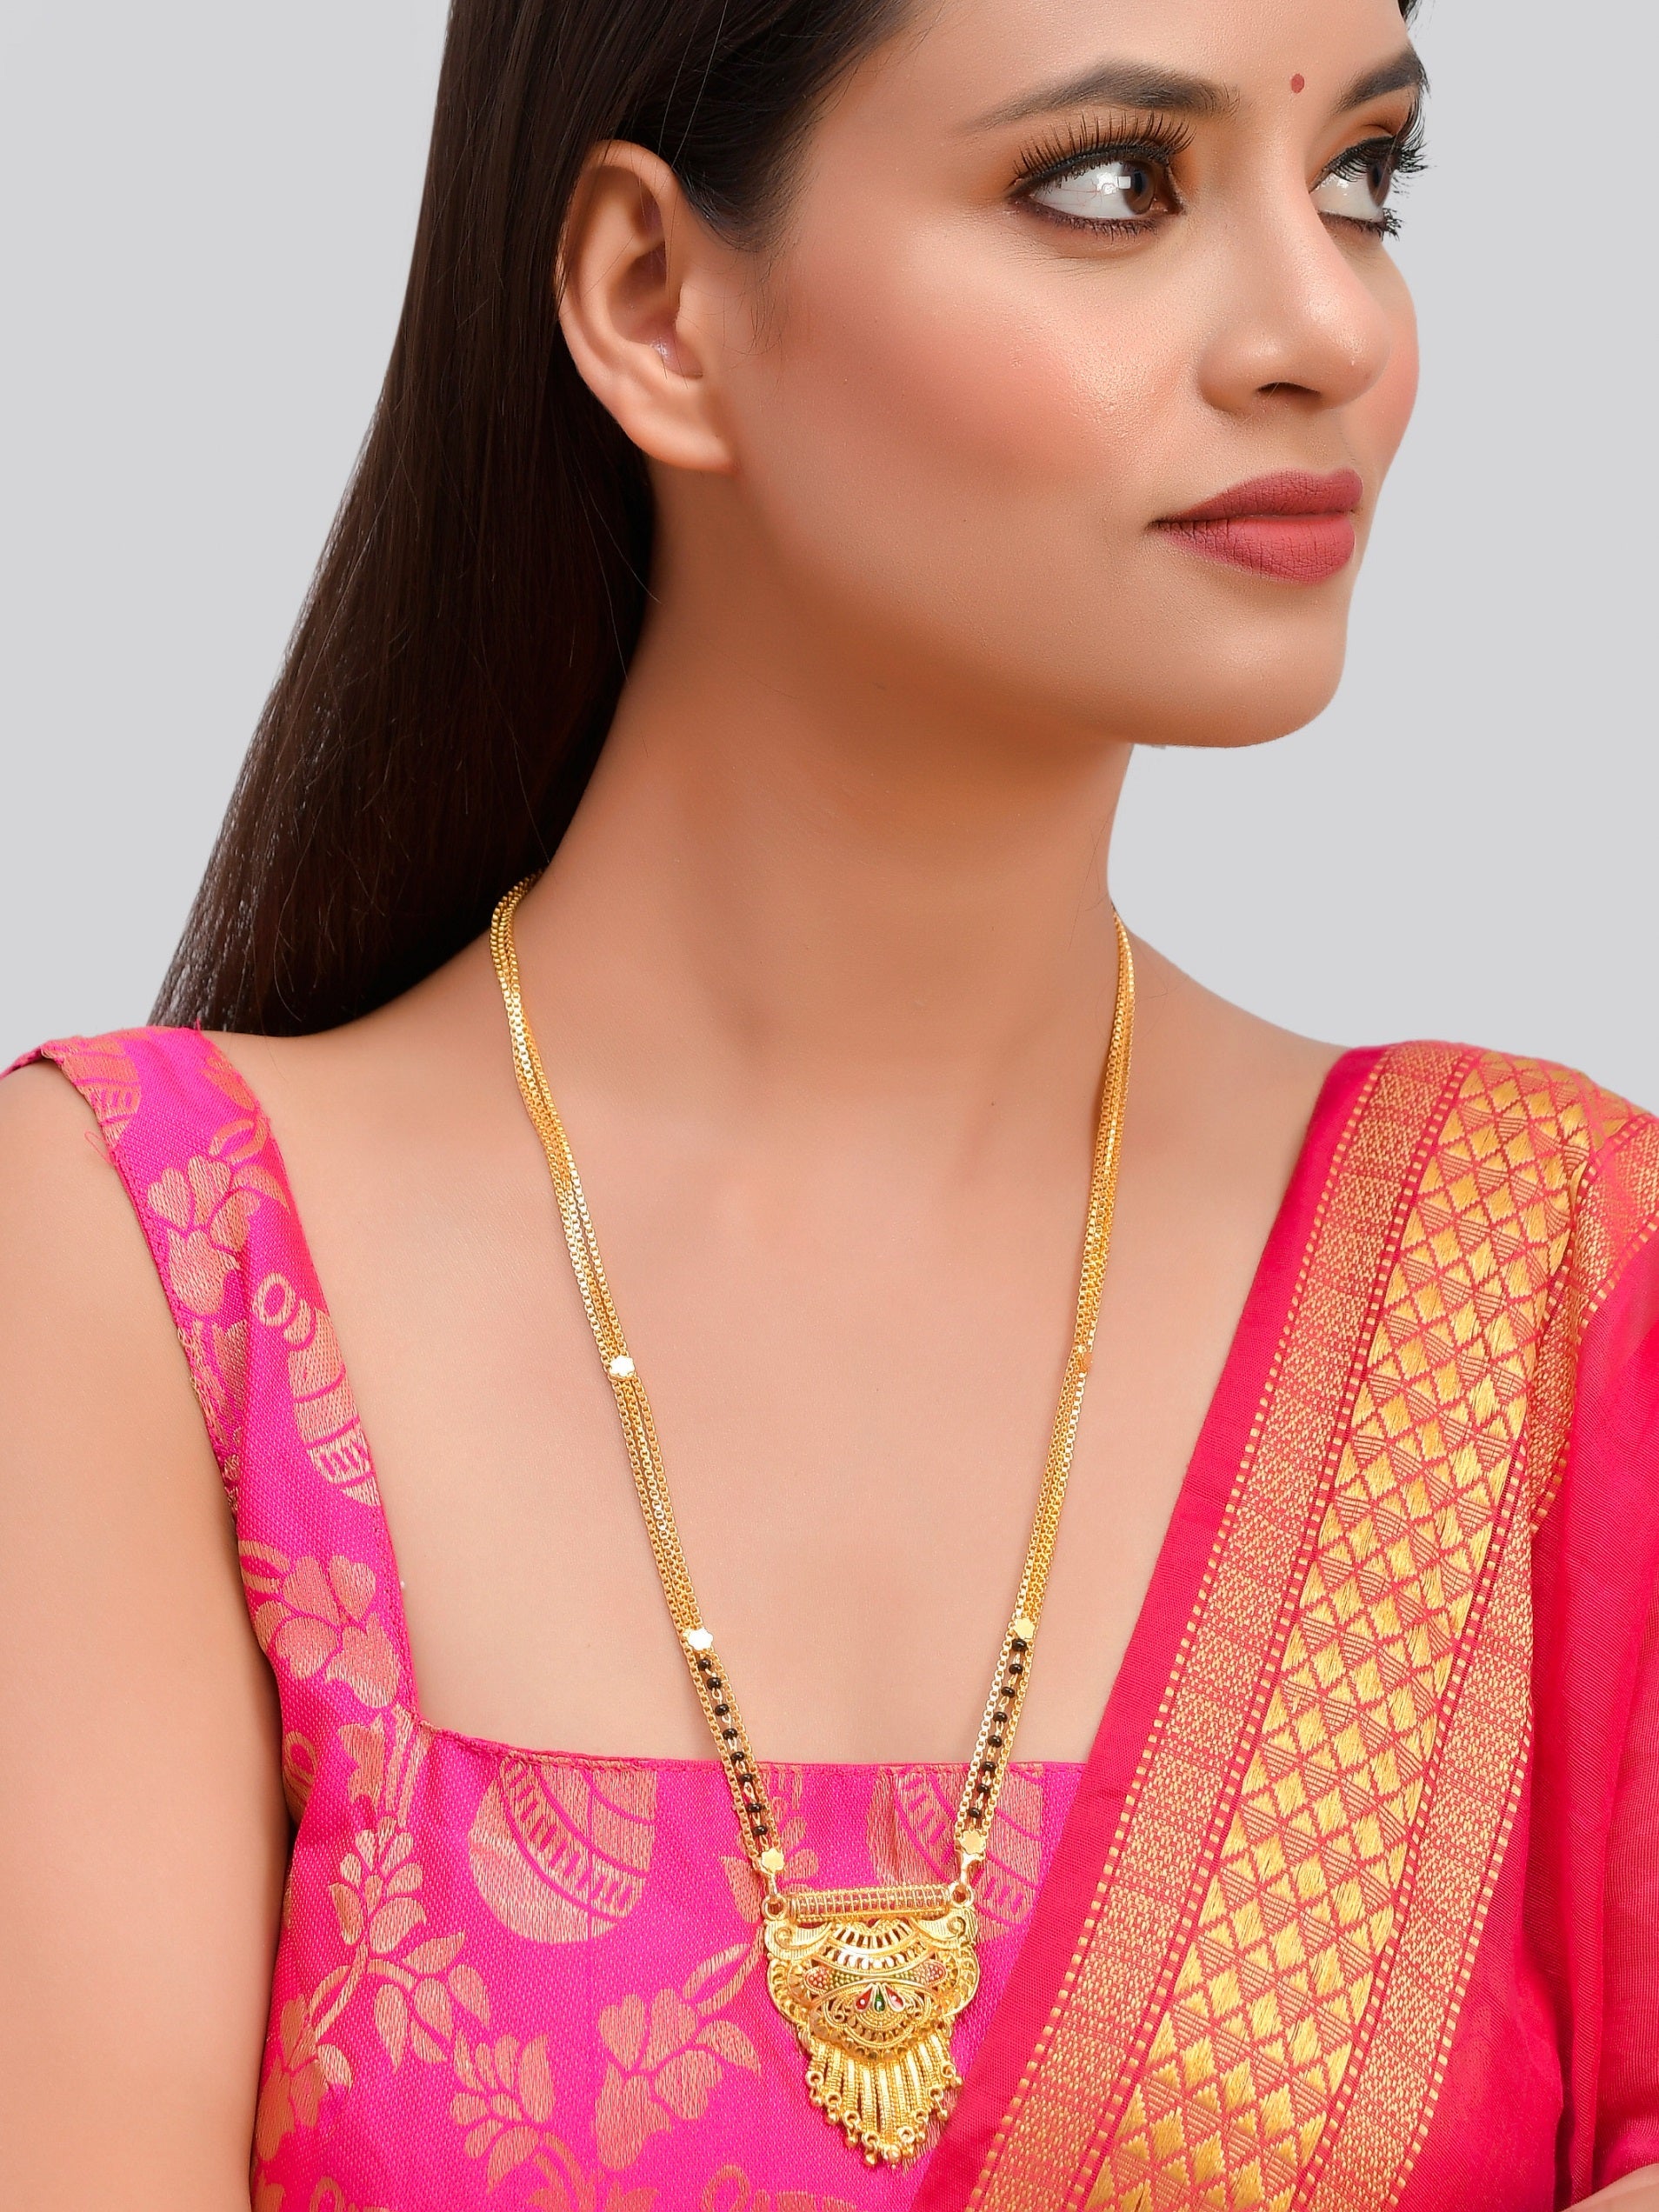 Black Beads Mangalsutra Chain Necklace